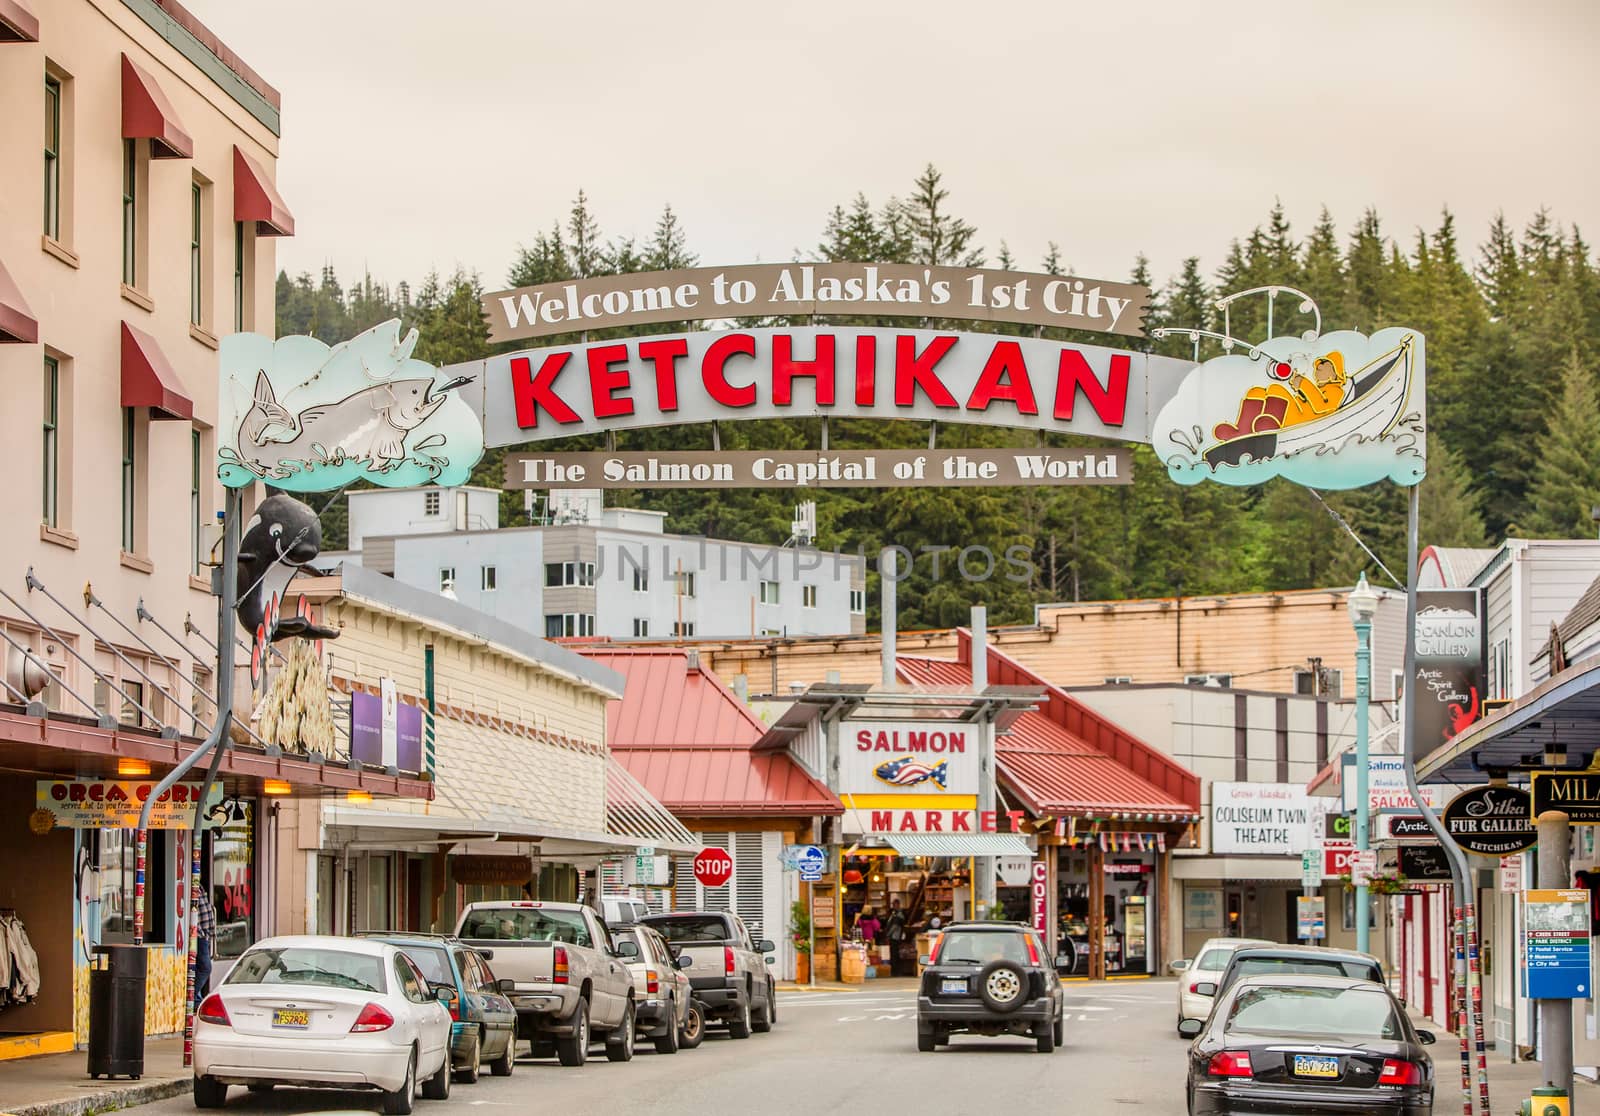 KETCHIKAN, AK - MAY 15: One of the first days of the tourist season on May 15, 2016 in Ketchikan, AK.